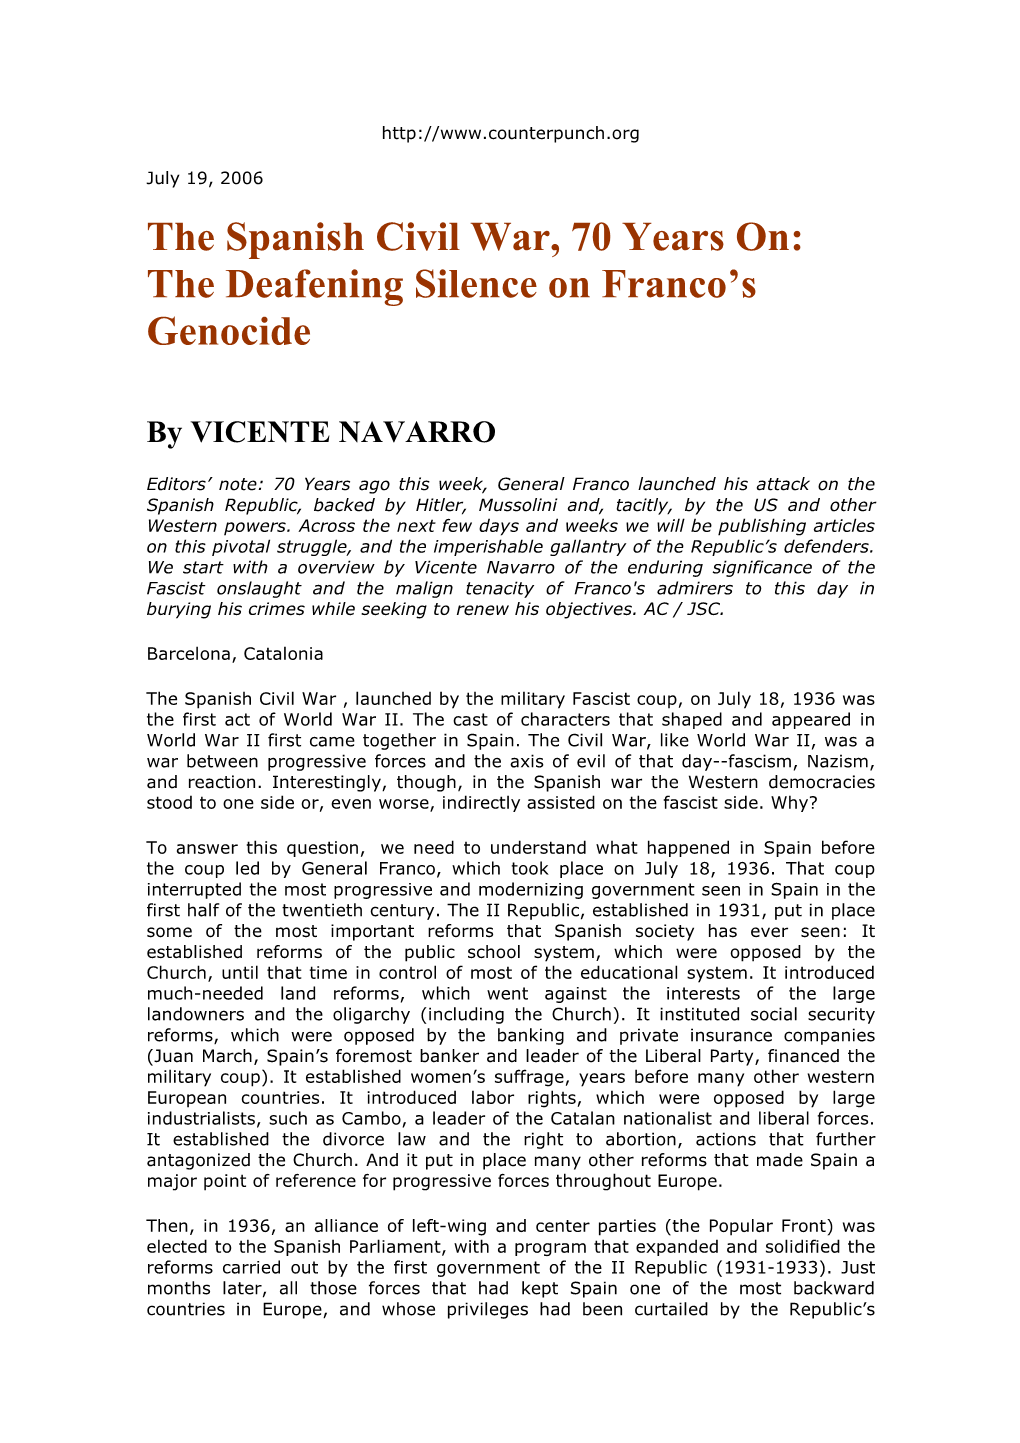 The Spanish Civil War, 70 Years On: the Deafening Silence on Franco’S Genocide